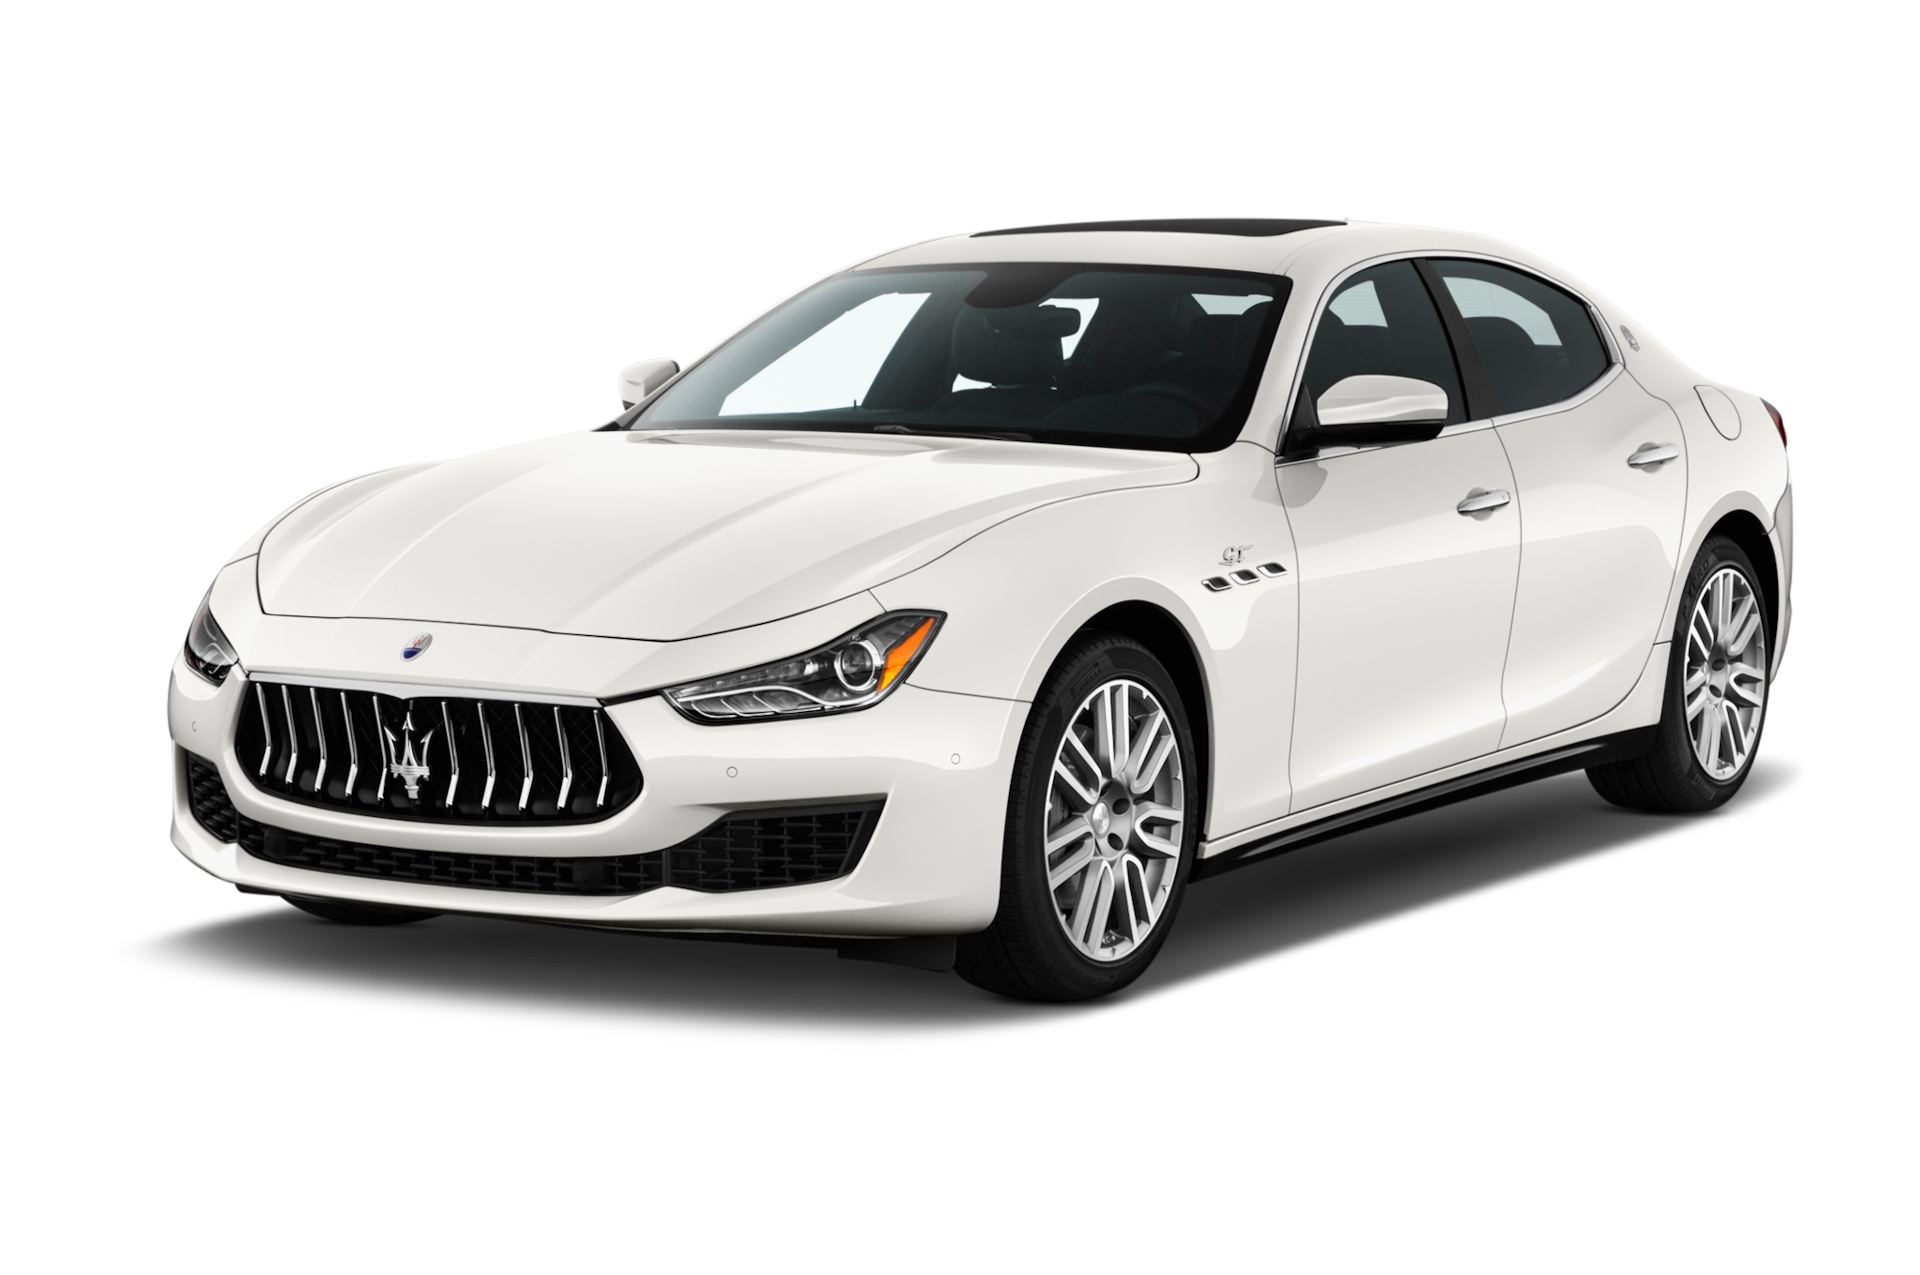 2023 Maserati Ghibli Prices, Reviews, and Photos - MotorTrend